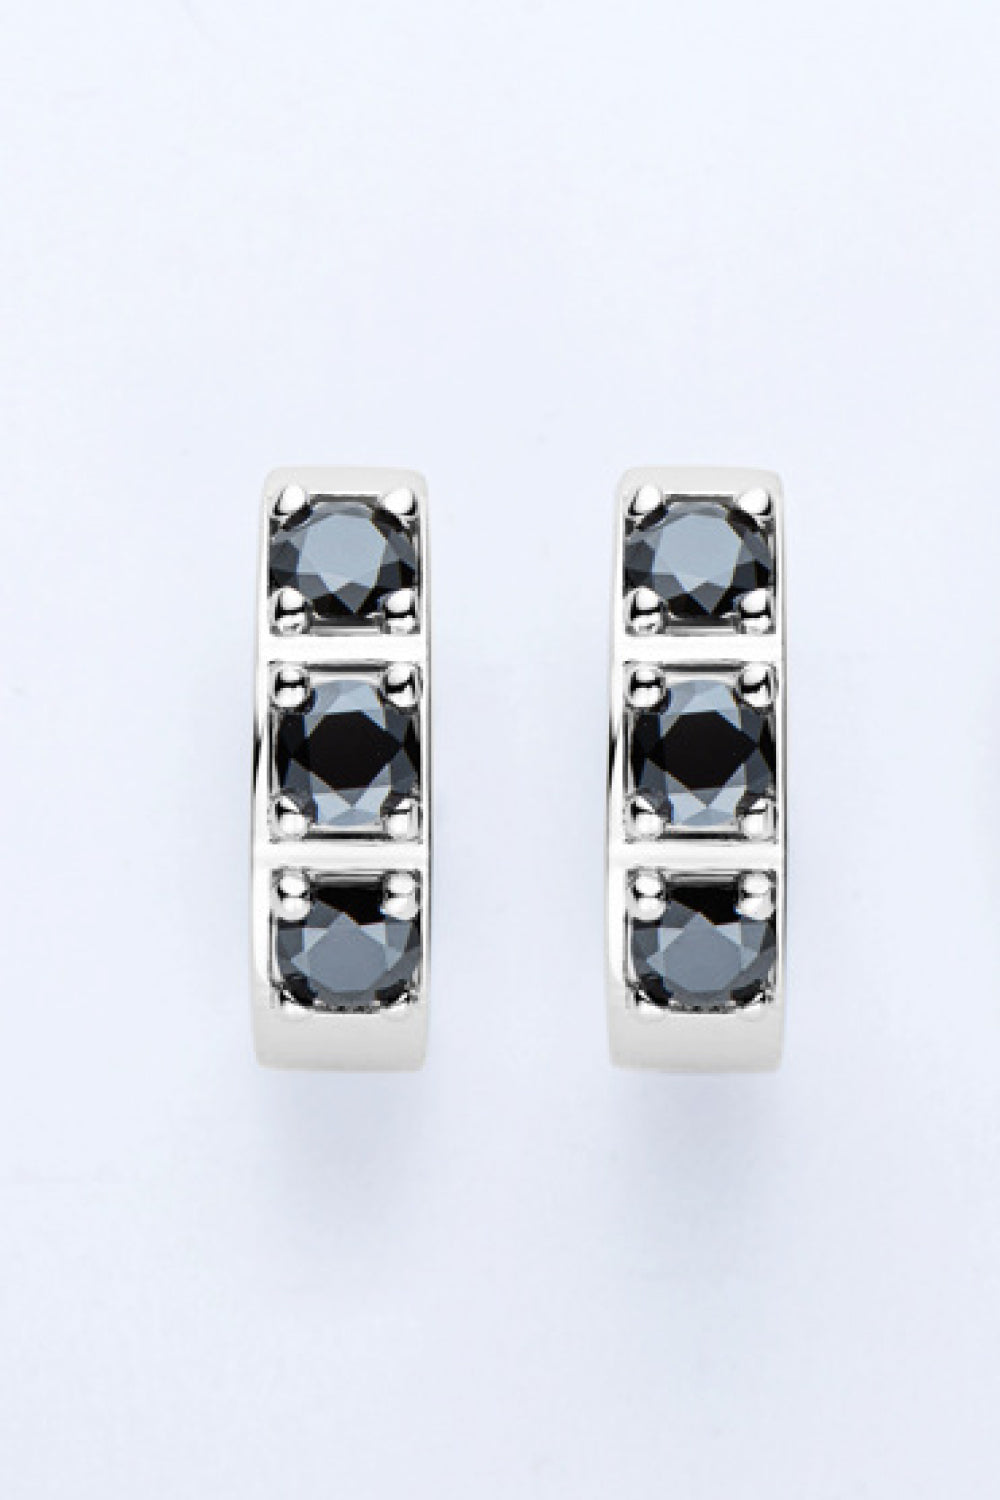 Inlaid Moissanite Huggie Earrings-Earrings-Inspired by Justeen-Women's Clothing Boutique in Chicago, Illinois